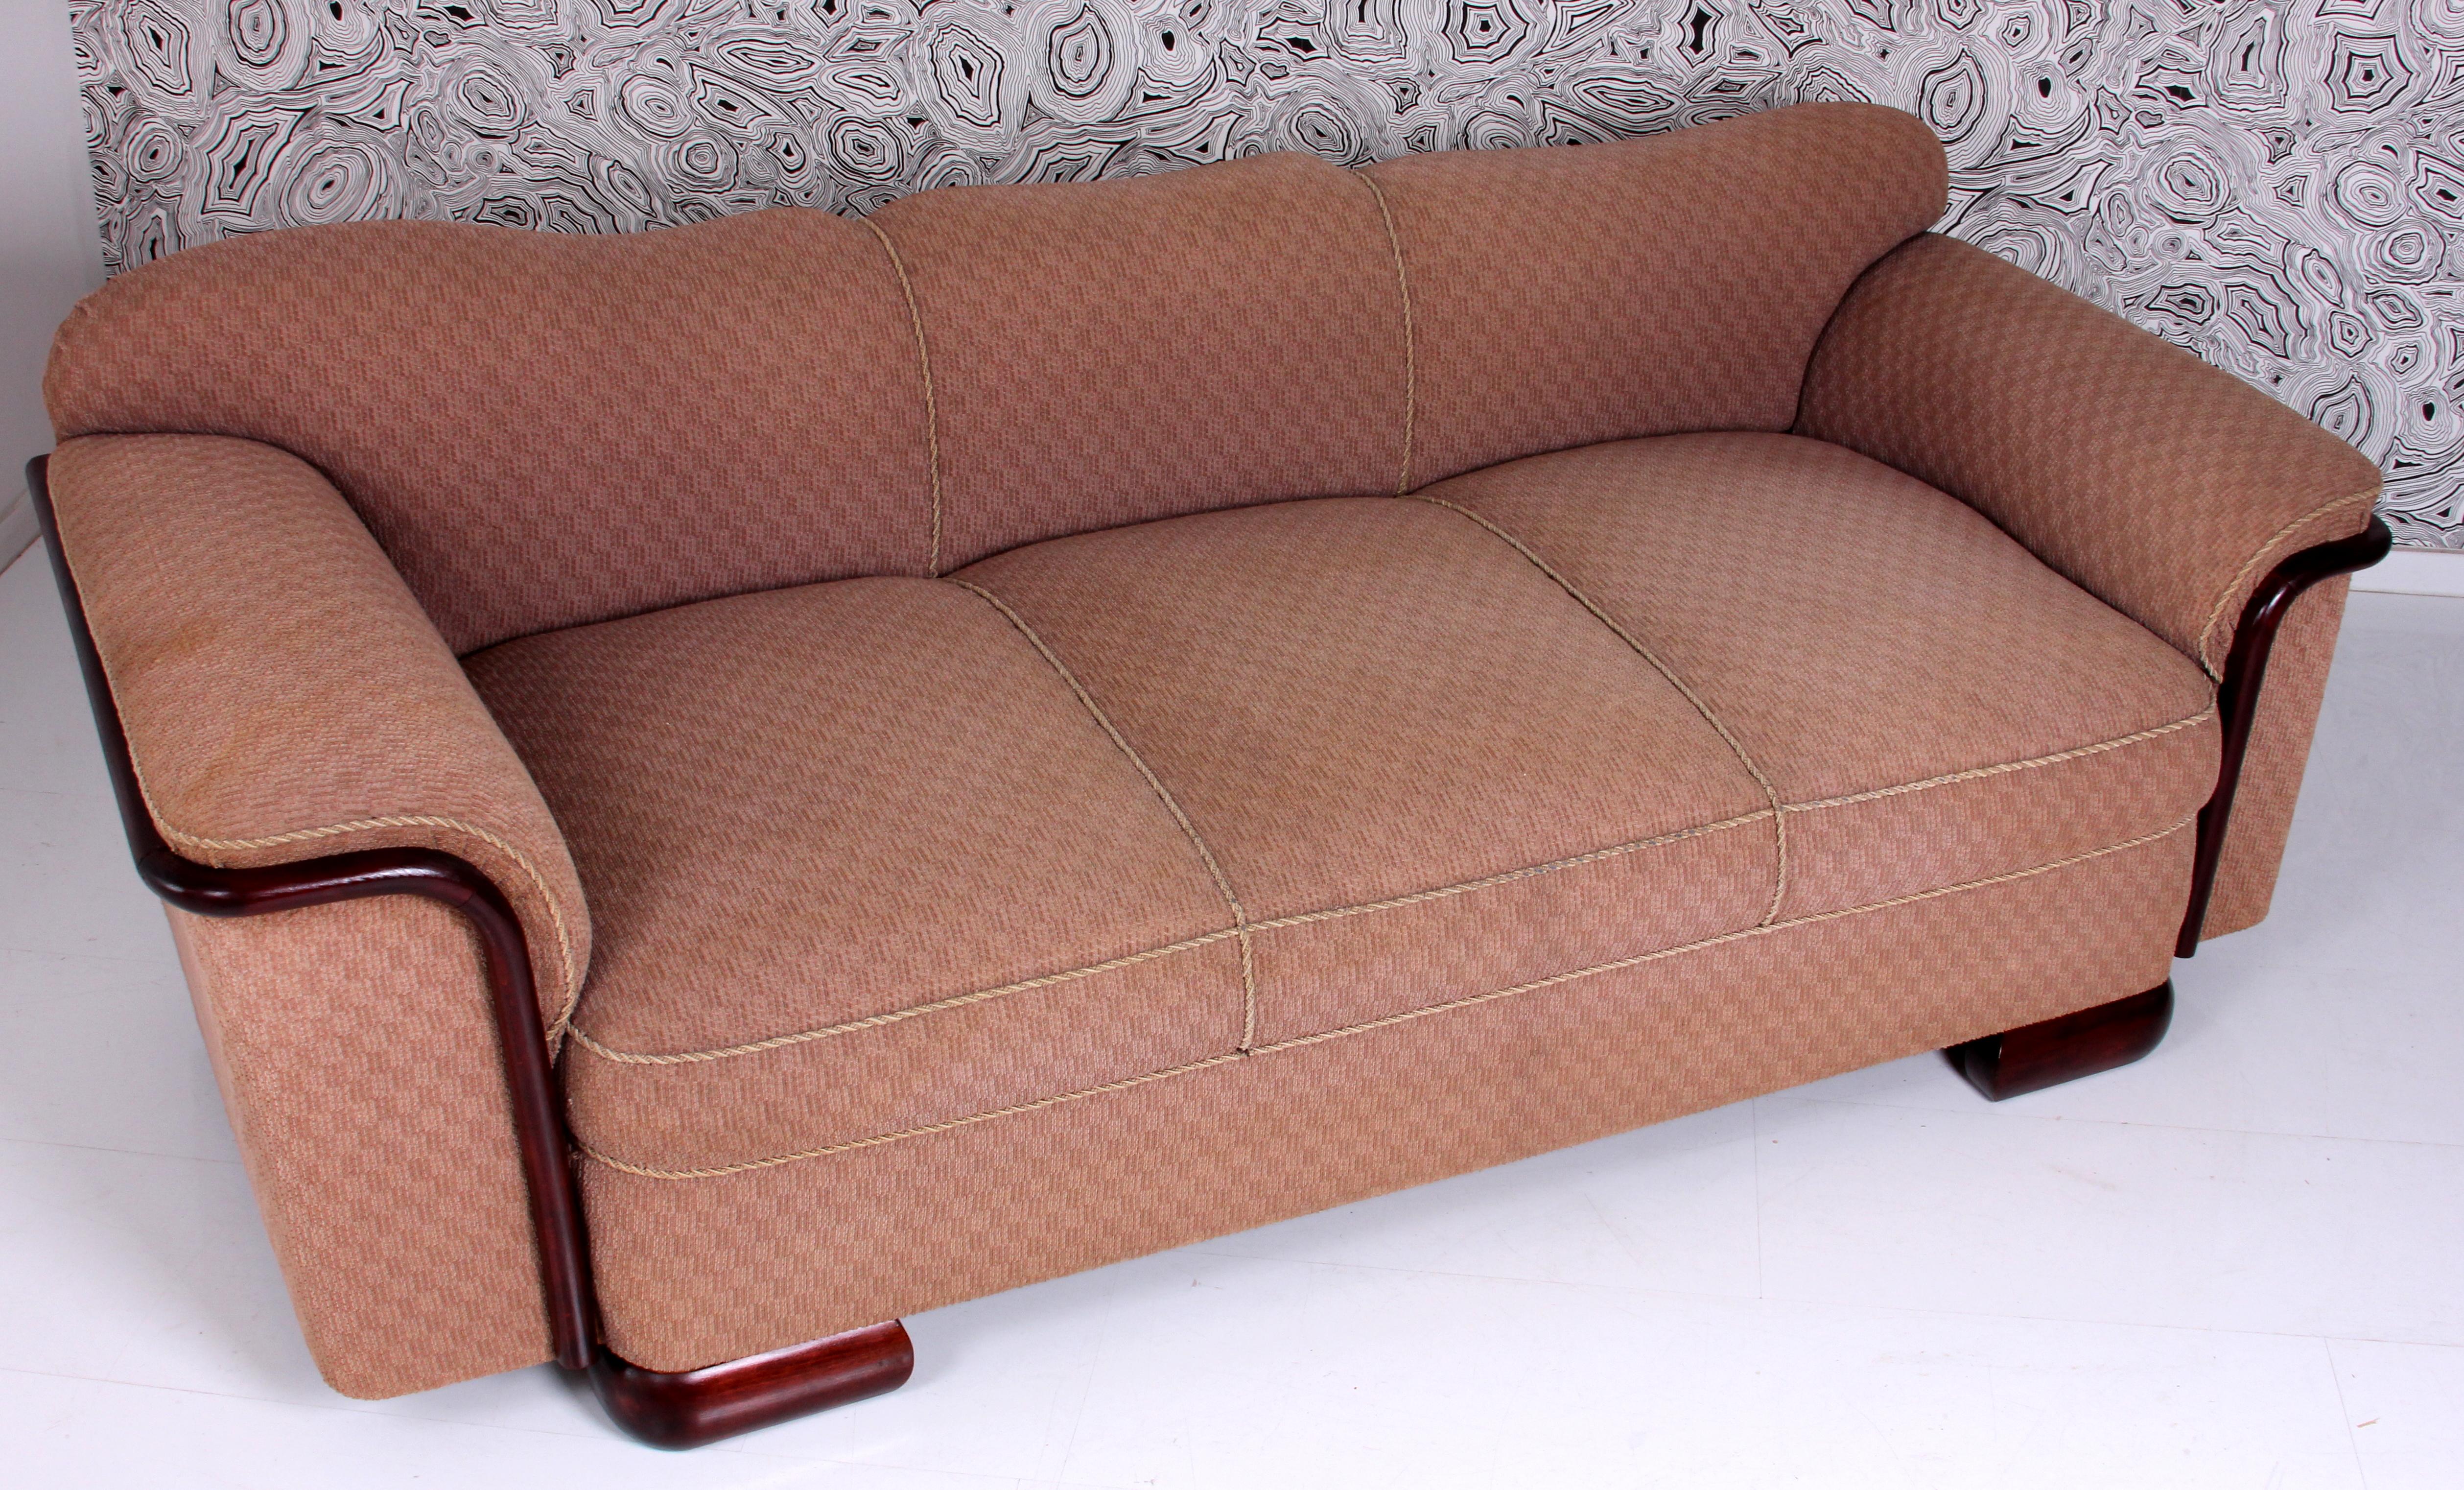 STRAIGHT classic art deco SOFA Dresden around 1930 or. fabric - wood refinished  For Sale 1